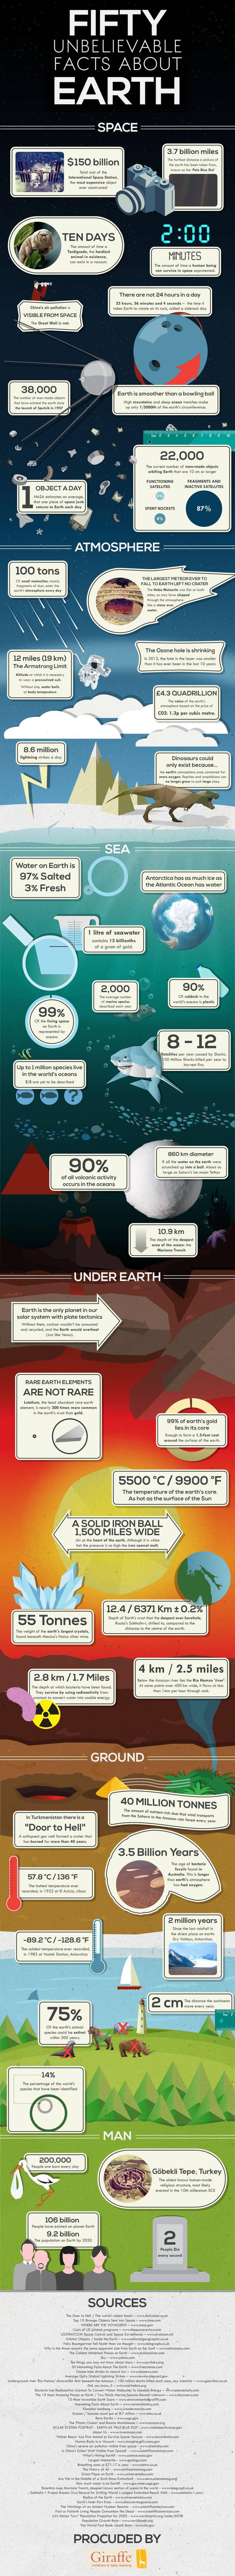 50-earth-facts